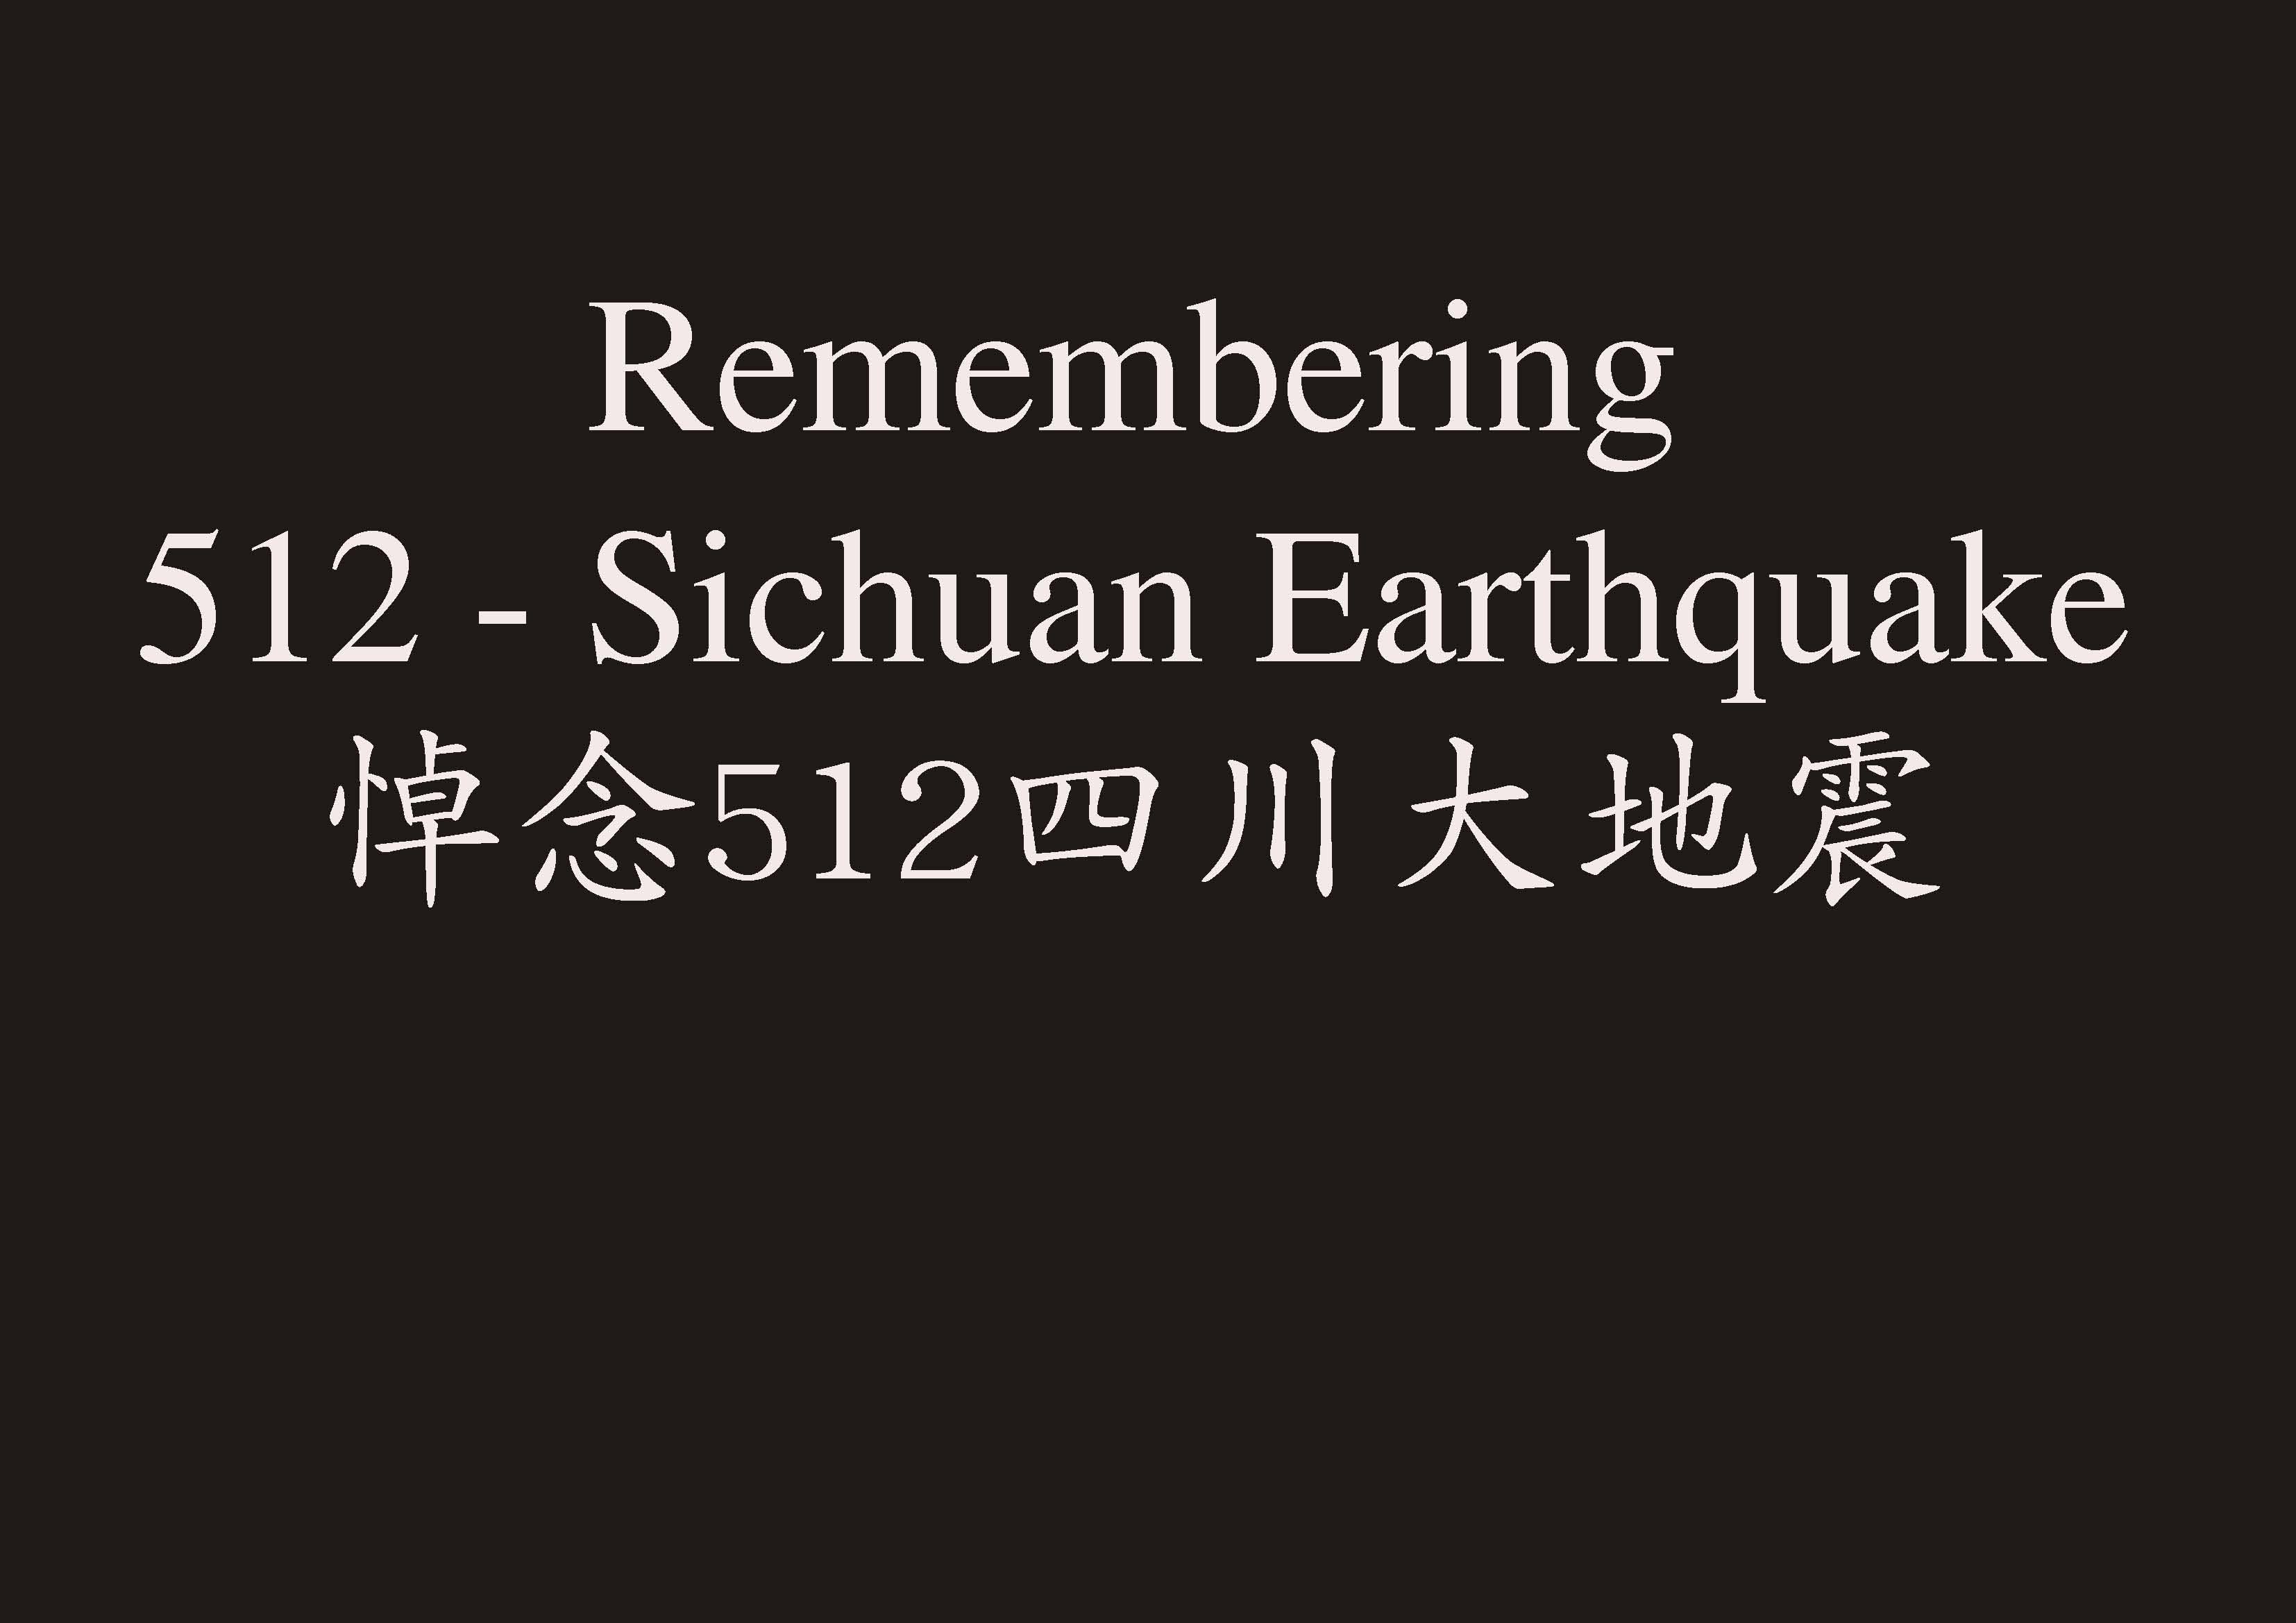 Remembering 512 - Sichuan Earthquake